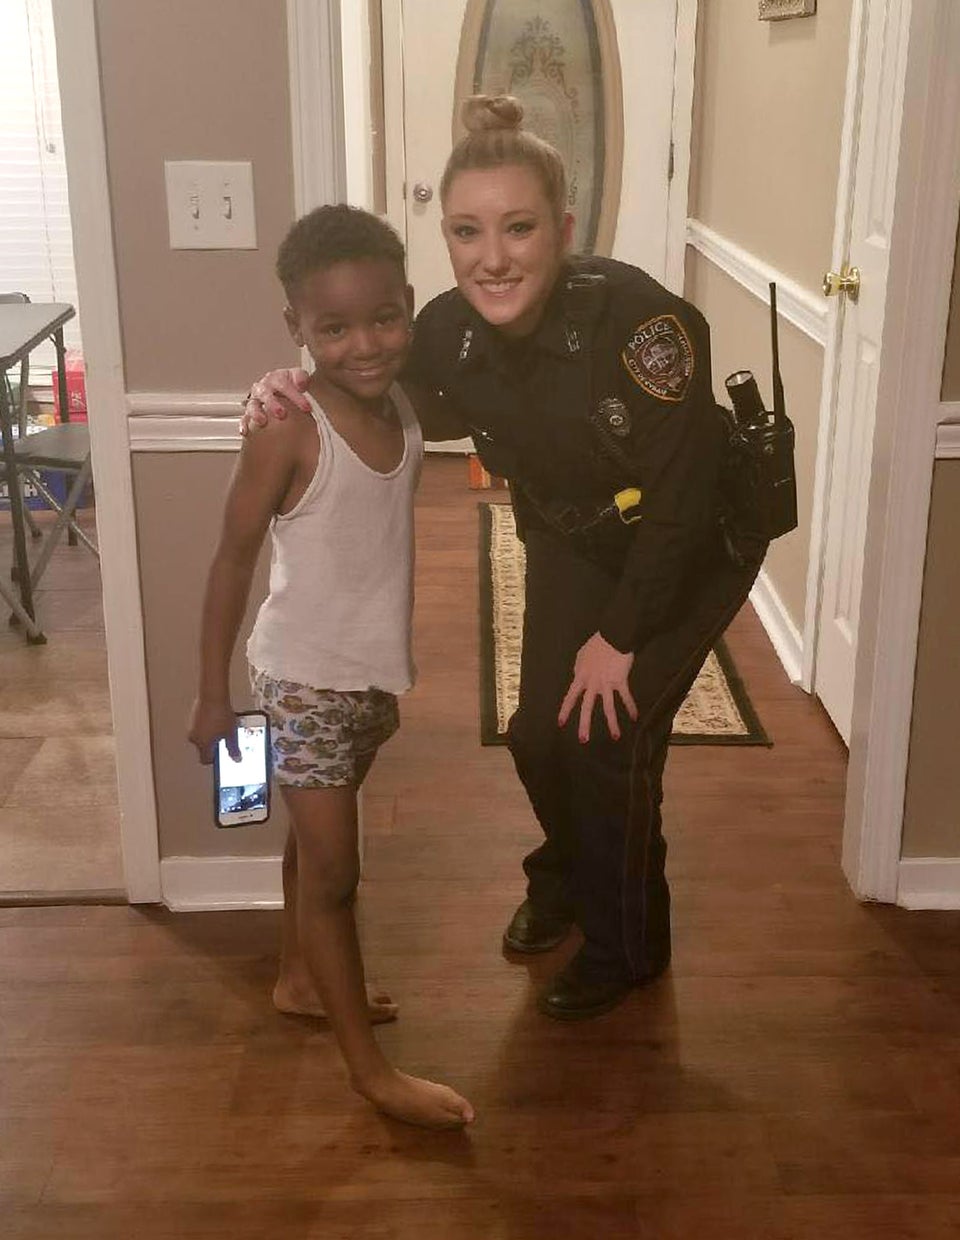 5-Year-Old Helps Apprehend the Grinch After Calling 911 to Stop Him from Stealing Christmas